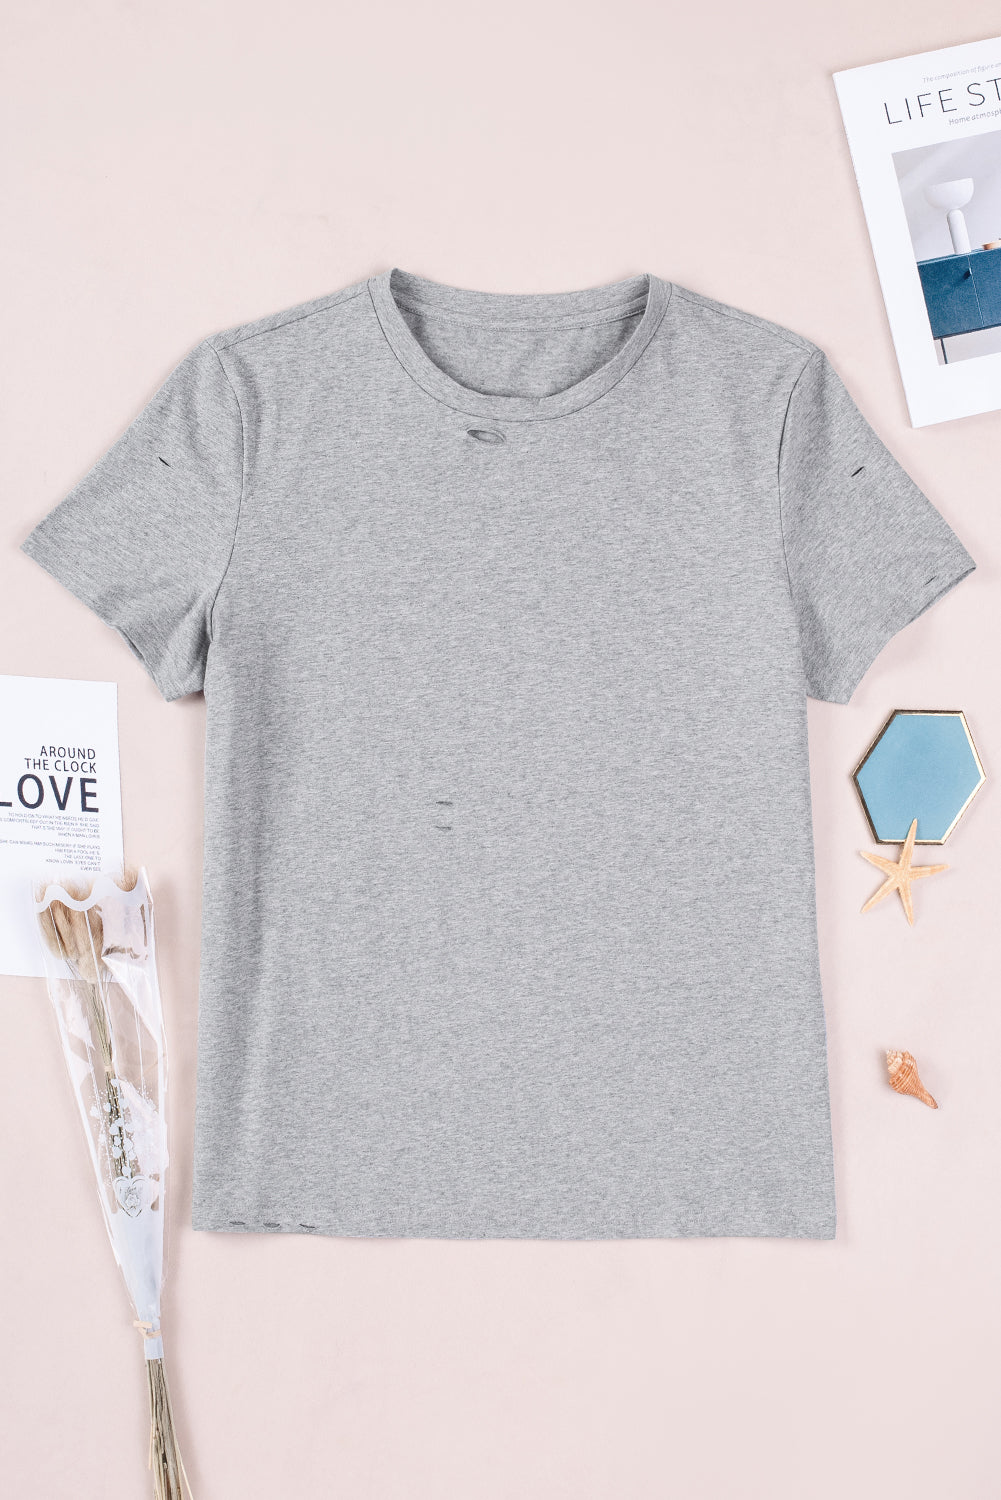 Gray Ripped Solid Color Short Sleeve T Shirt